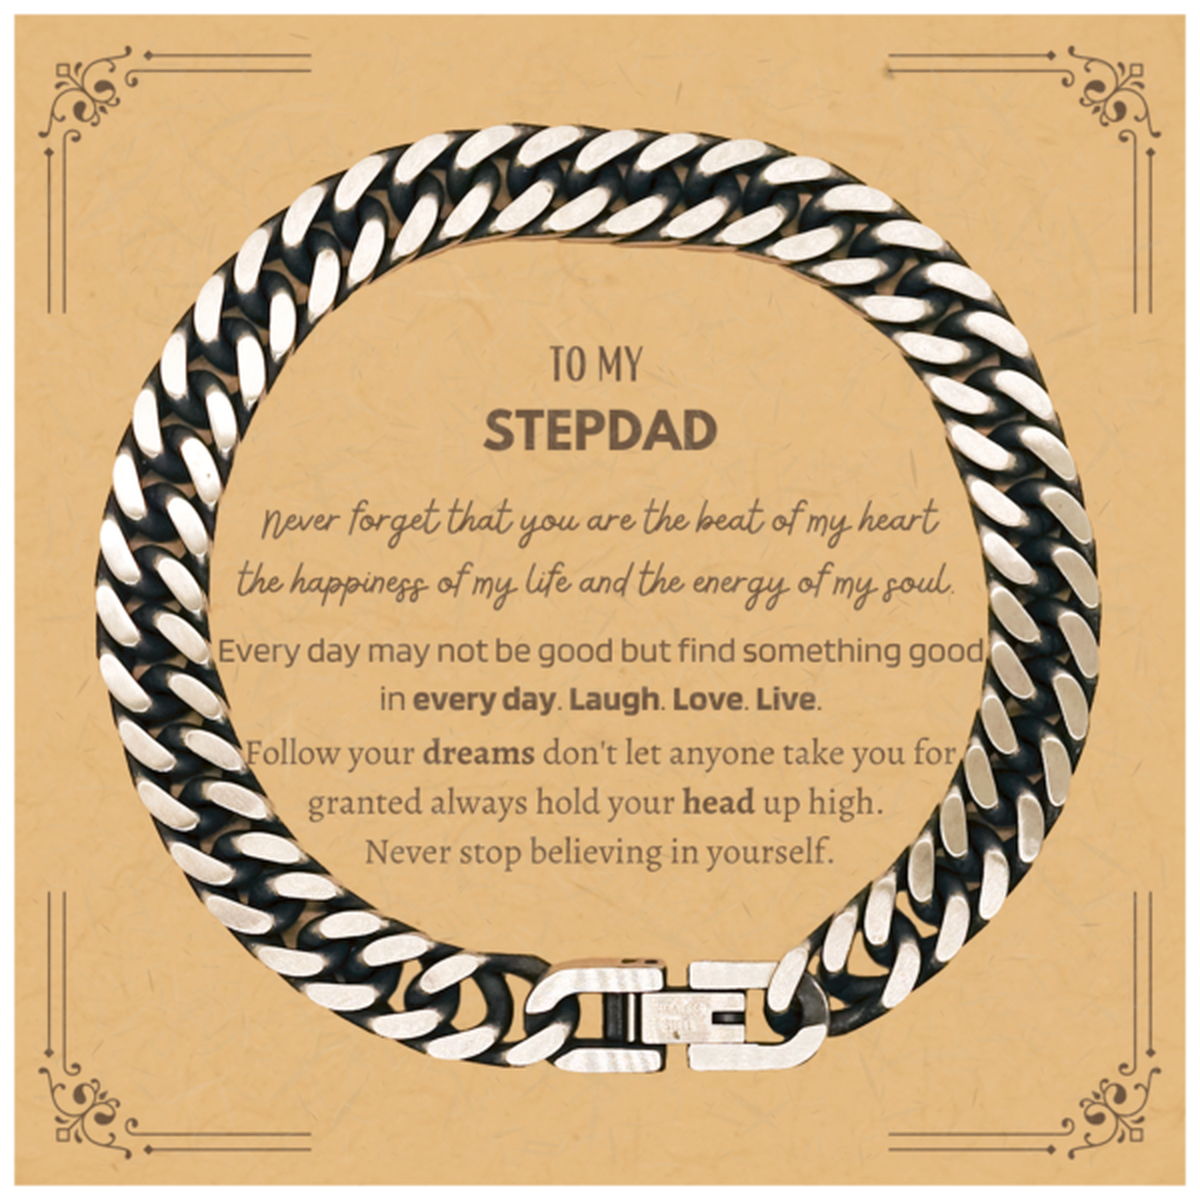 To My Stepdad Message Card Gifts, Christmas Stepdad Cuban Link Chain Bracelet Present, Birthday Unique Motivational For Stepdad, To My Stepdad Never forget that you are the beat of my heart the happiness of my life and the energy of my soul